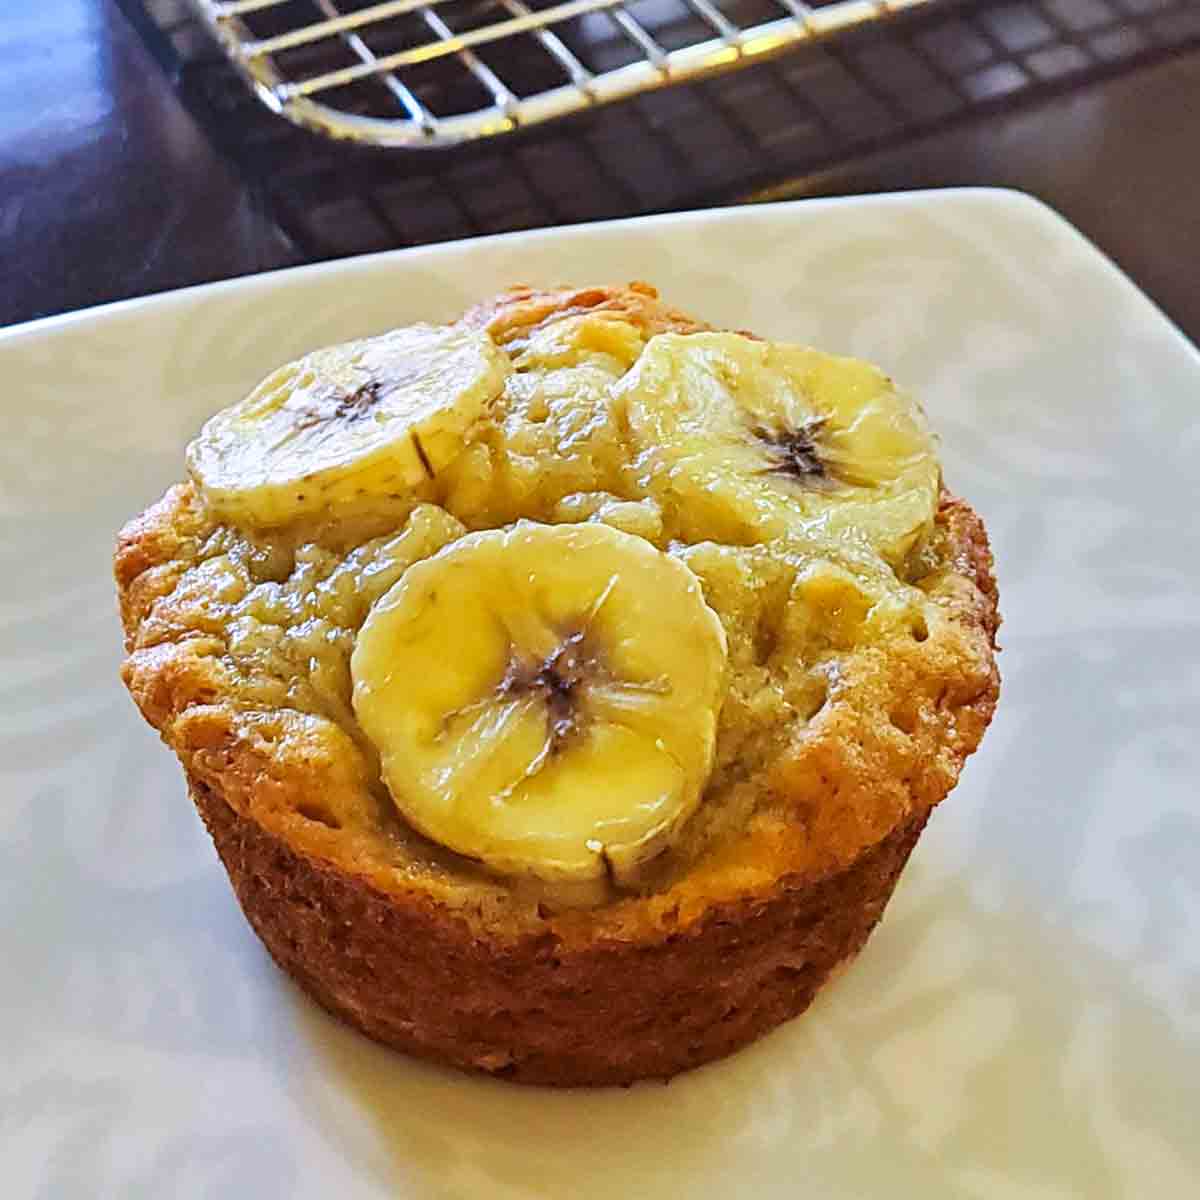 A single banana topped muffin on a white plate.